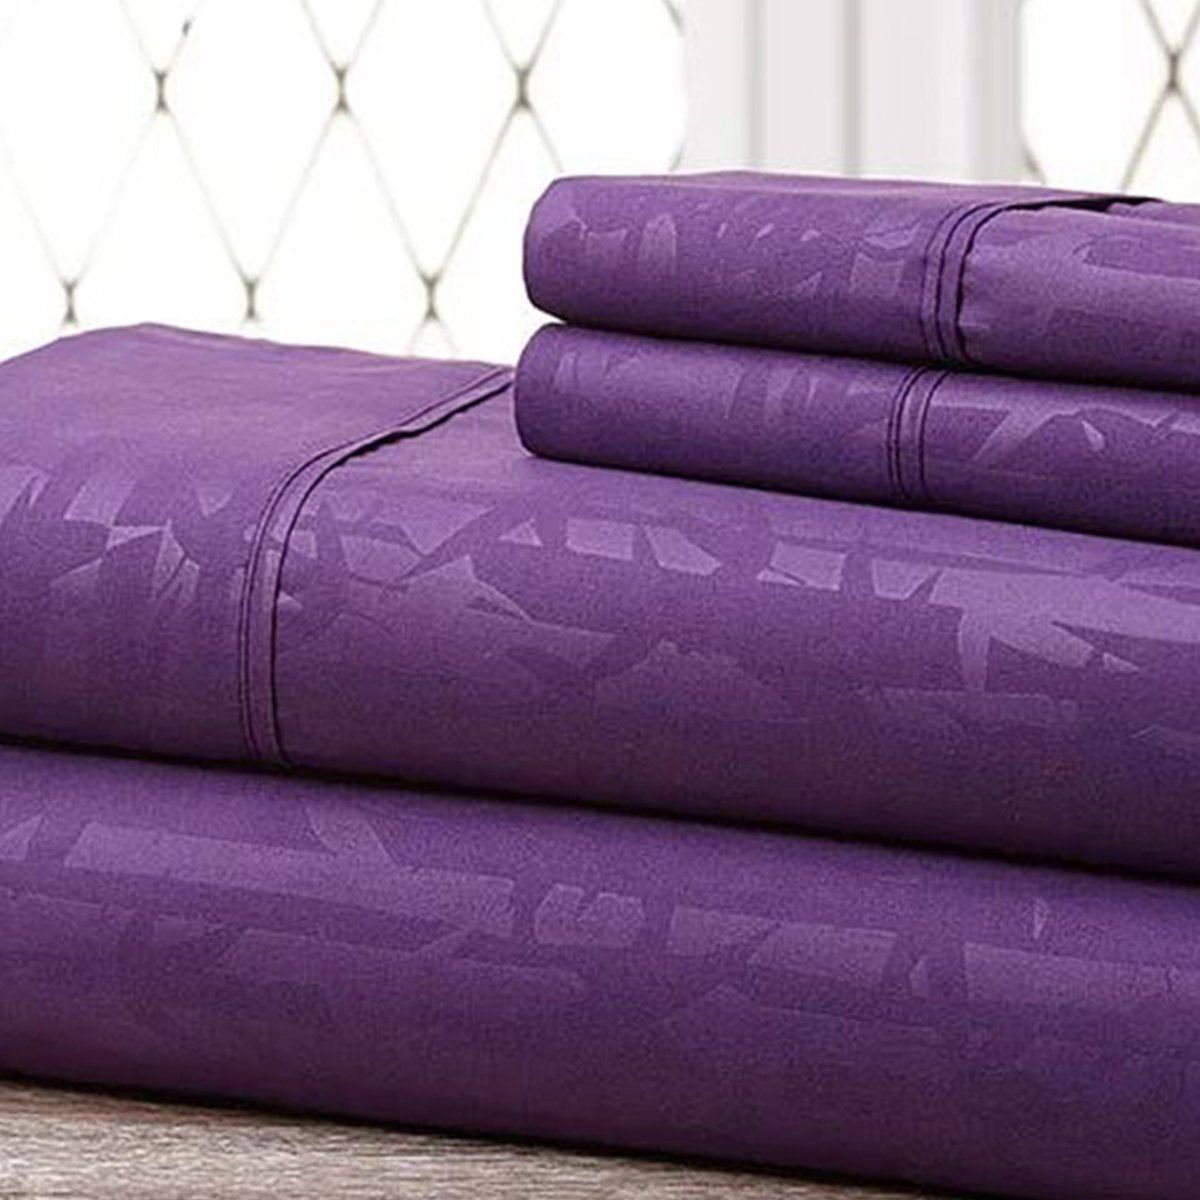 Super-soft 1600 Series Bamboo Embossed Bed Sheet, Purple - King, 4 Piece